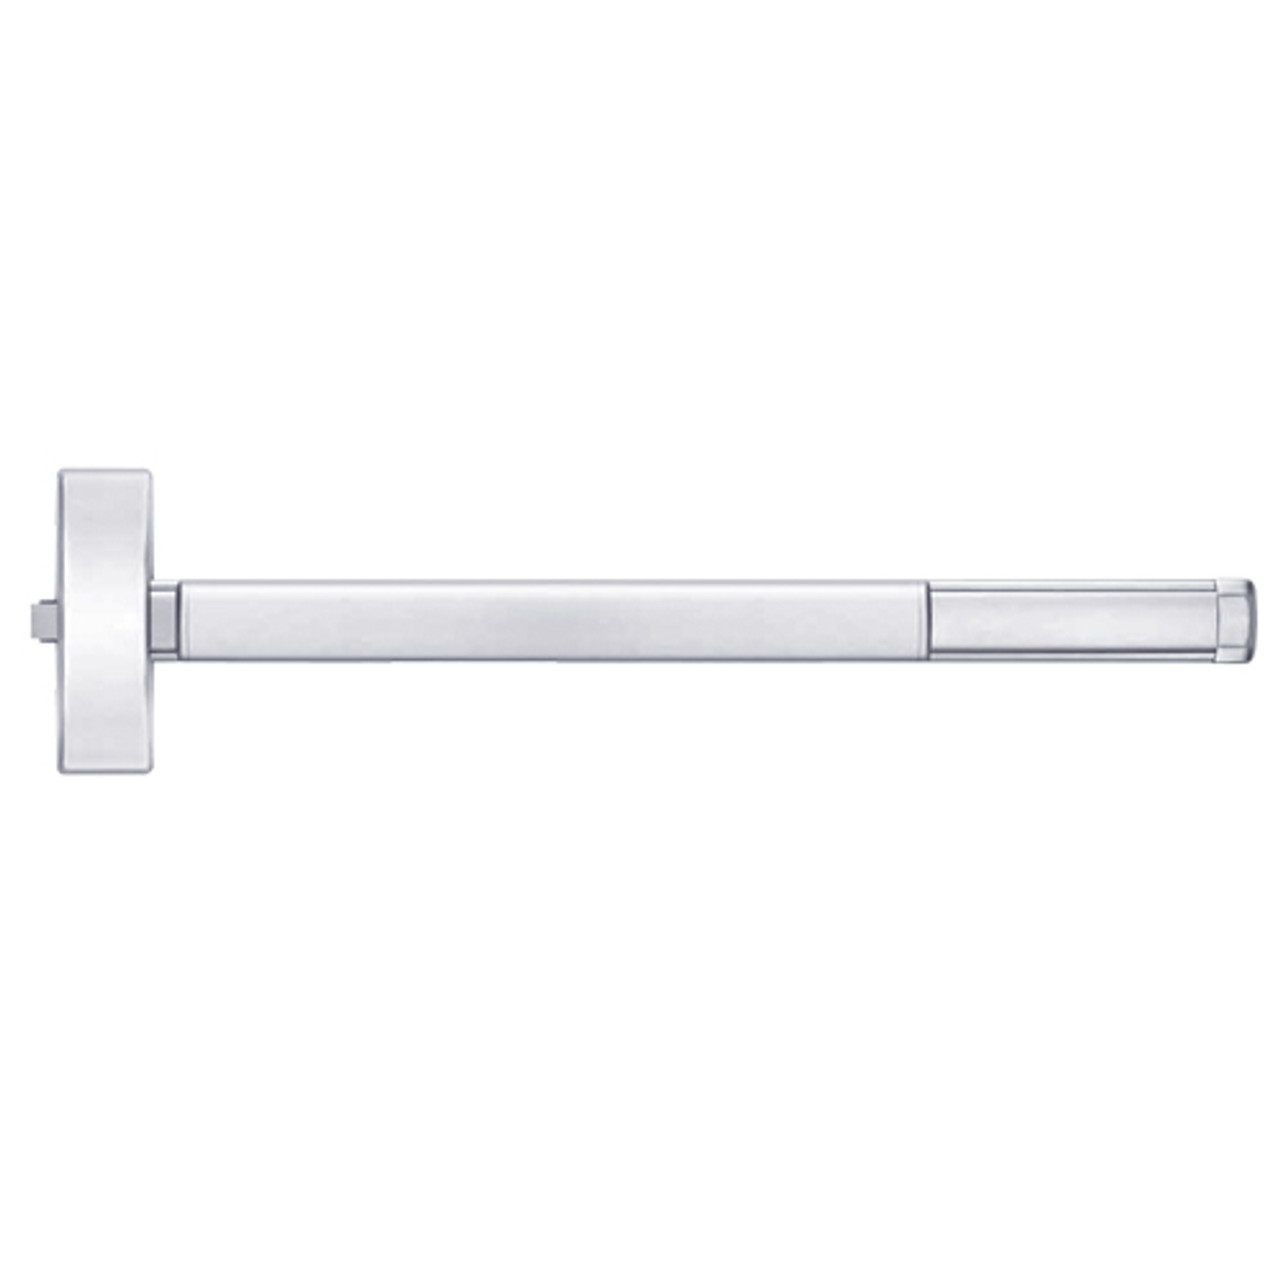 TSFL2115-625-36 PHI 2100 Series Fire Rated Apex Rim Exit Device with Touchbar Monitoring Switch Prepped for Thumb Piece Always Active in Bright Chrome Finish